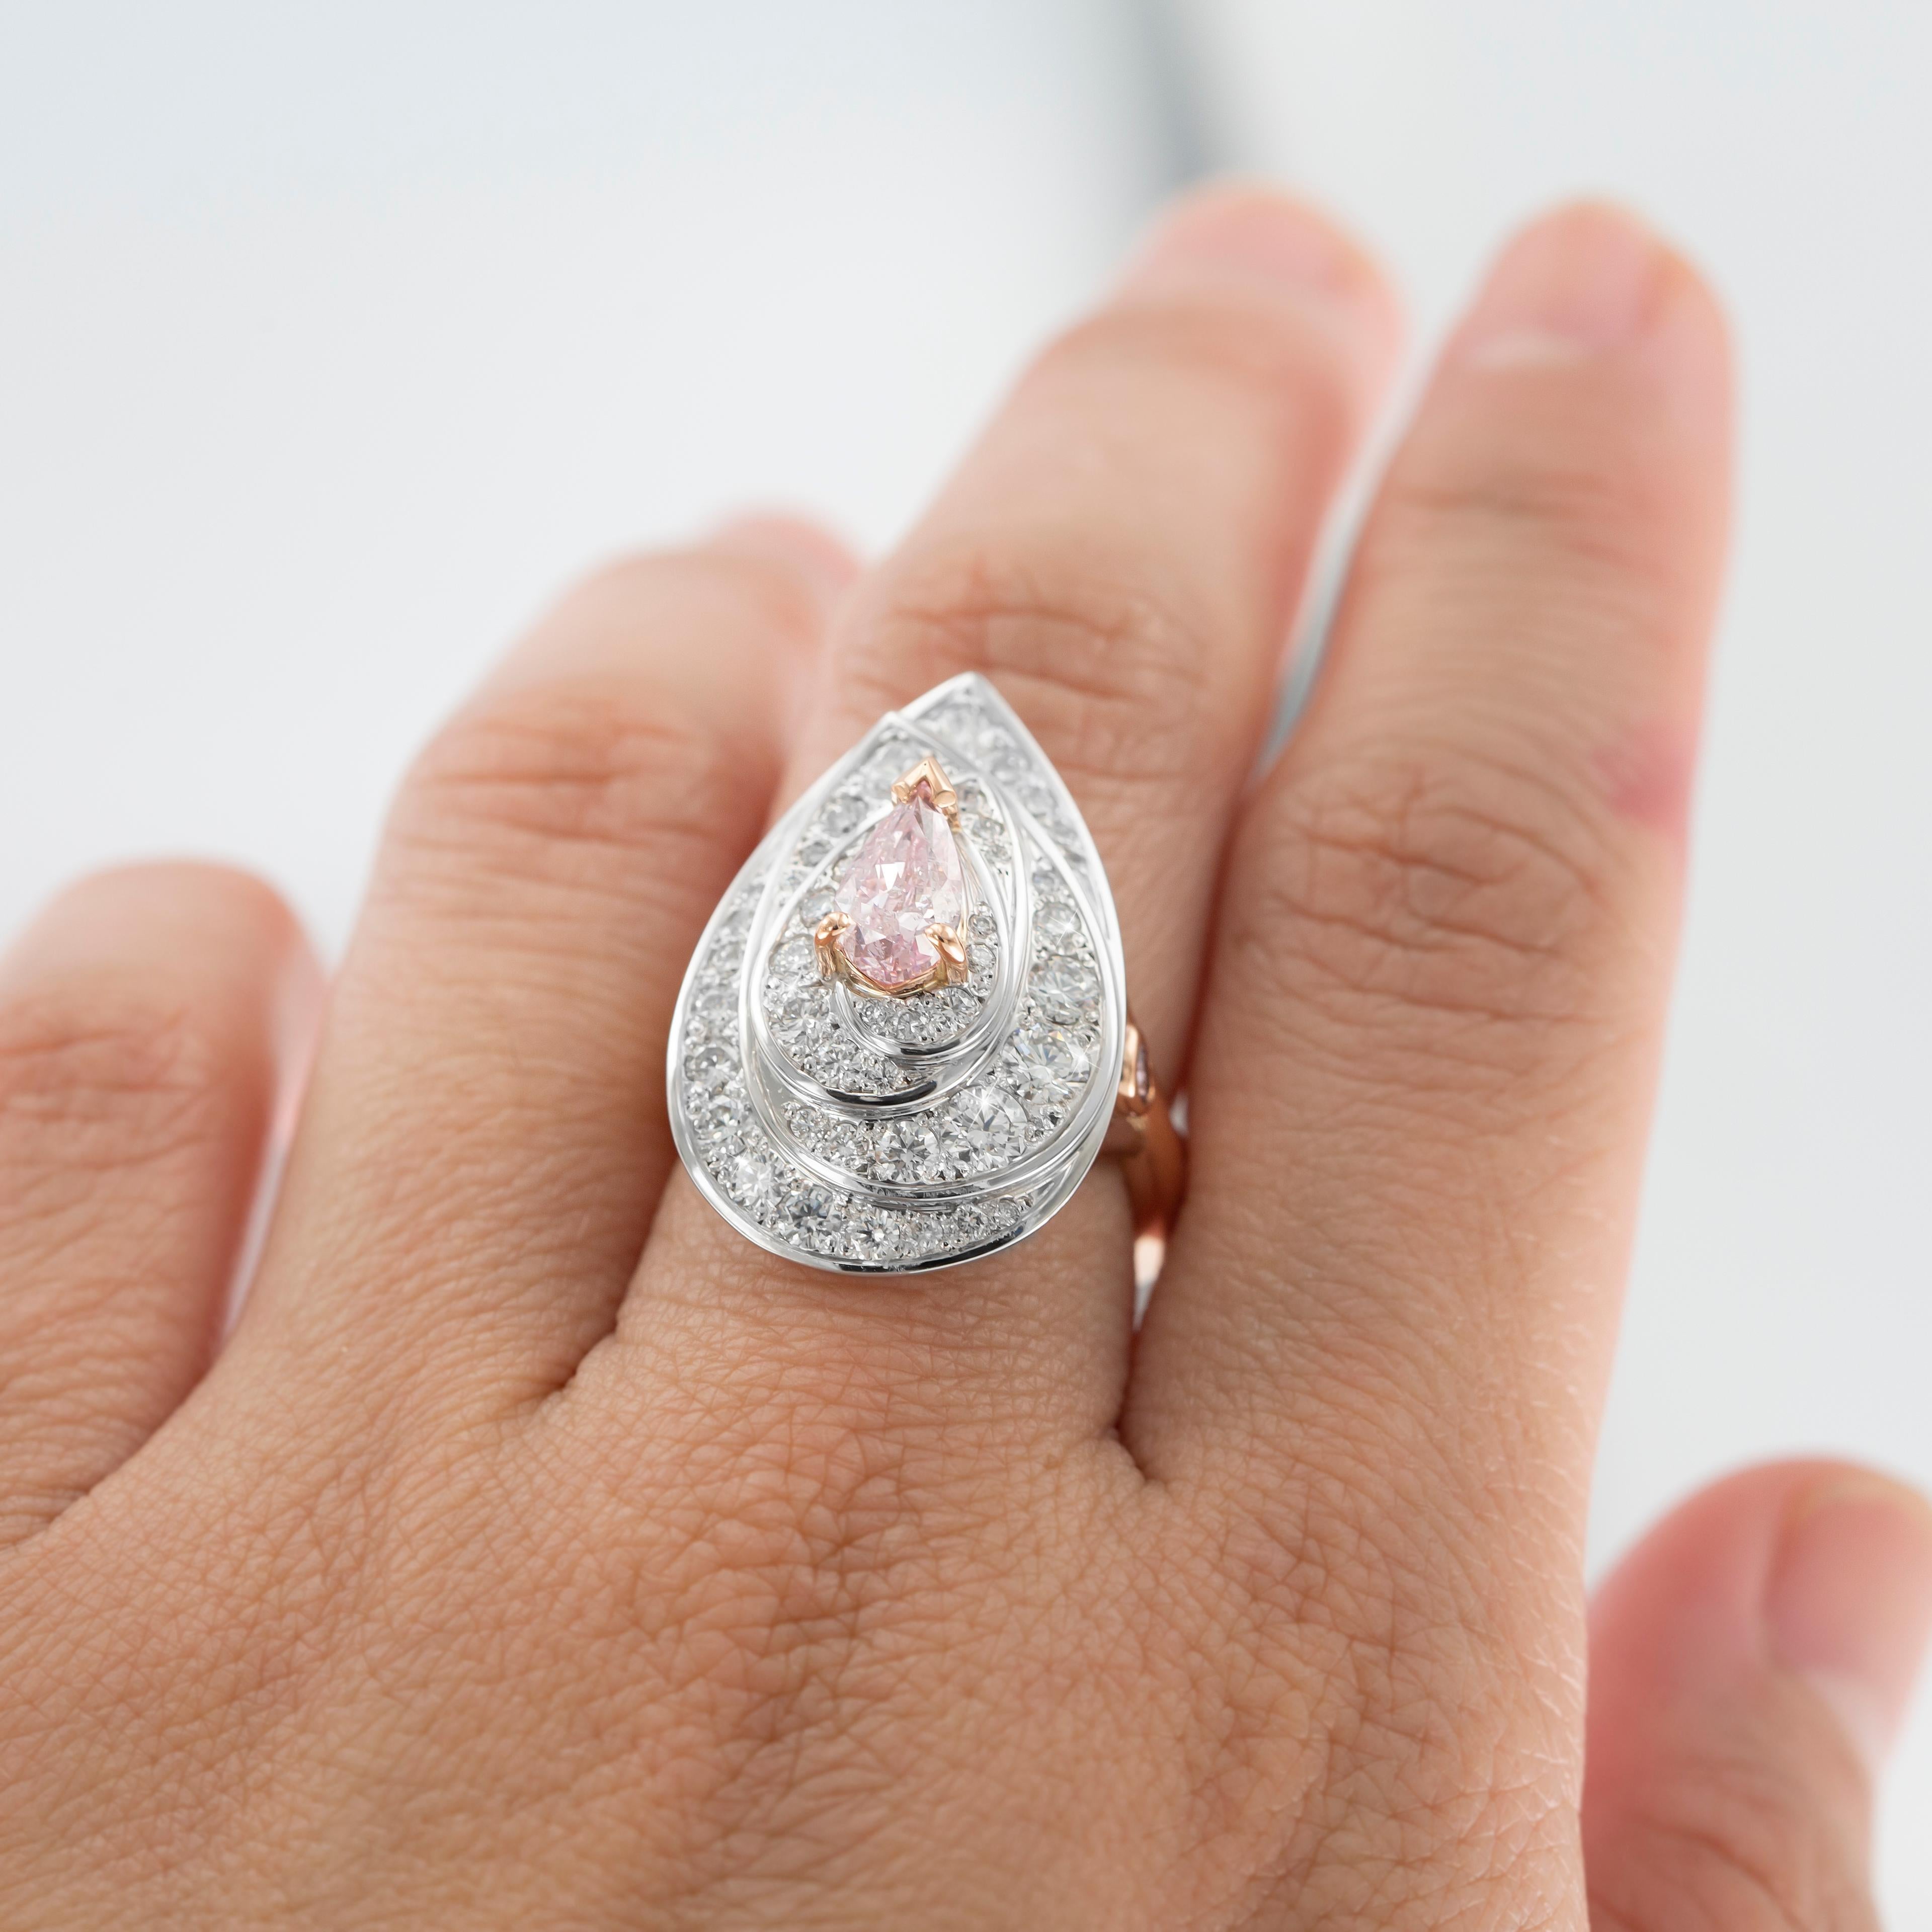 Love. It’s a powerful emotion in any language. The Amore pink and white diamond cluster ring draws upon the idea that love, through its support, and touch, has the power to transform all those that it connects with.

Through love, represented by the